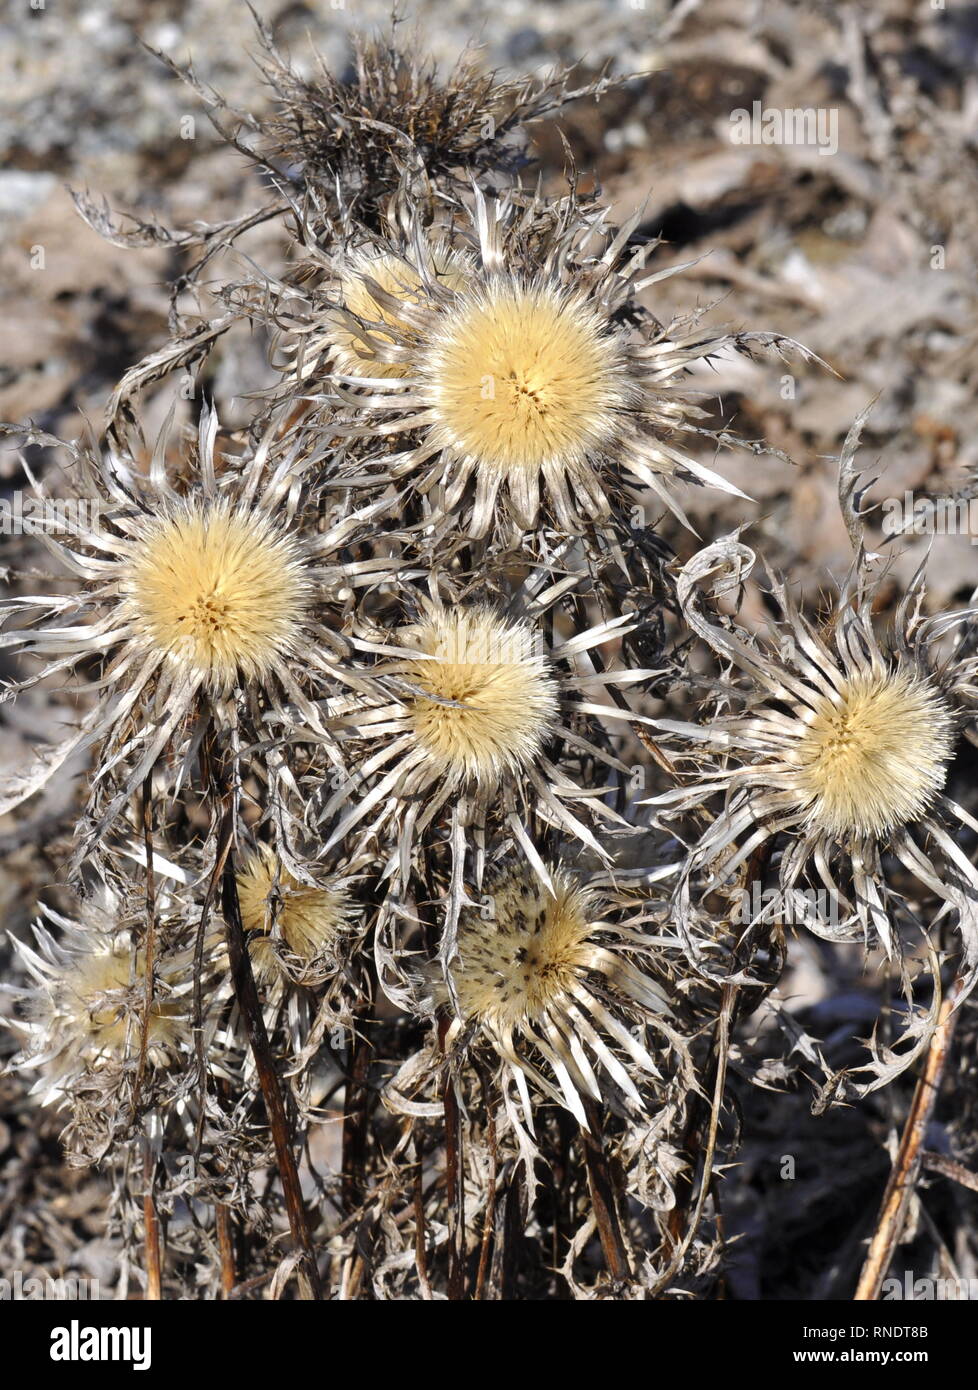 Seed from the silver thistle plant Carlina acaulis Stock Photo